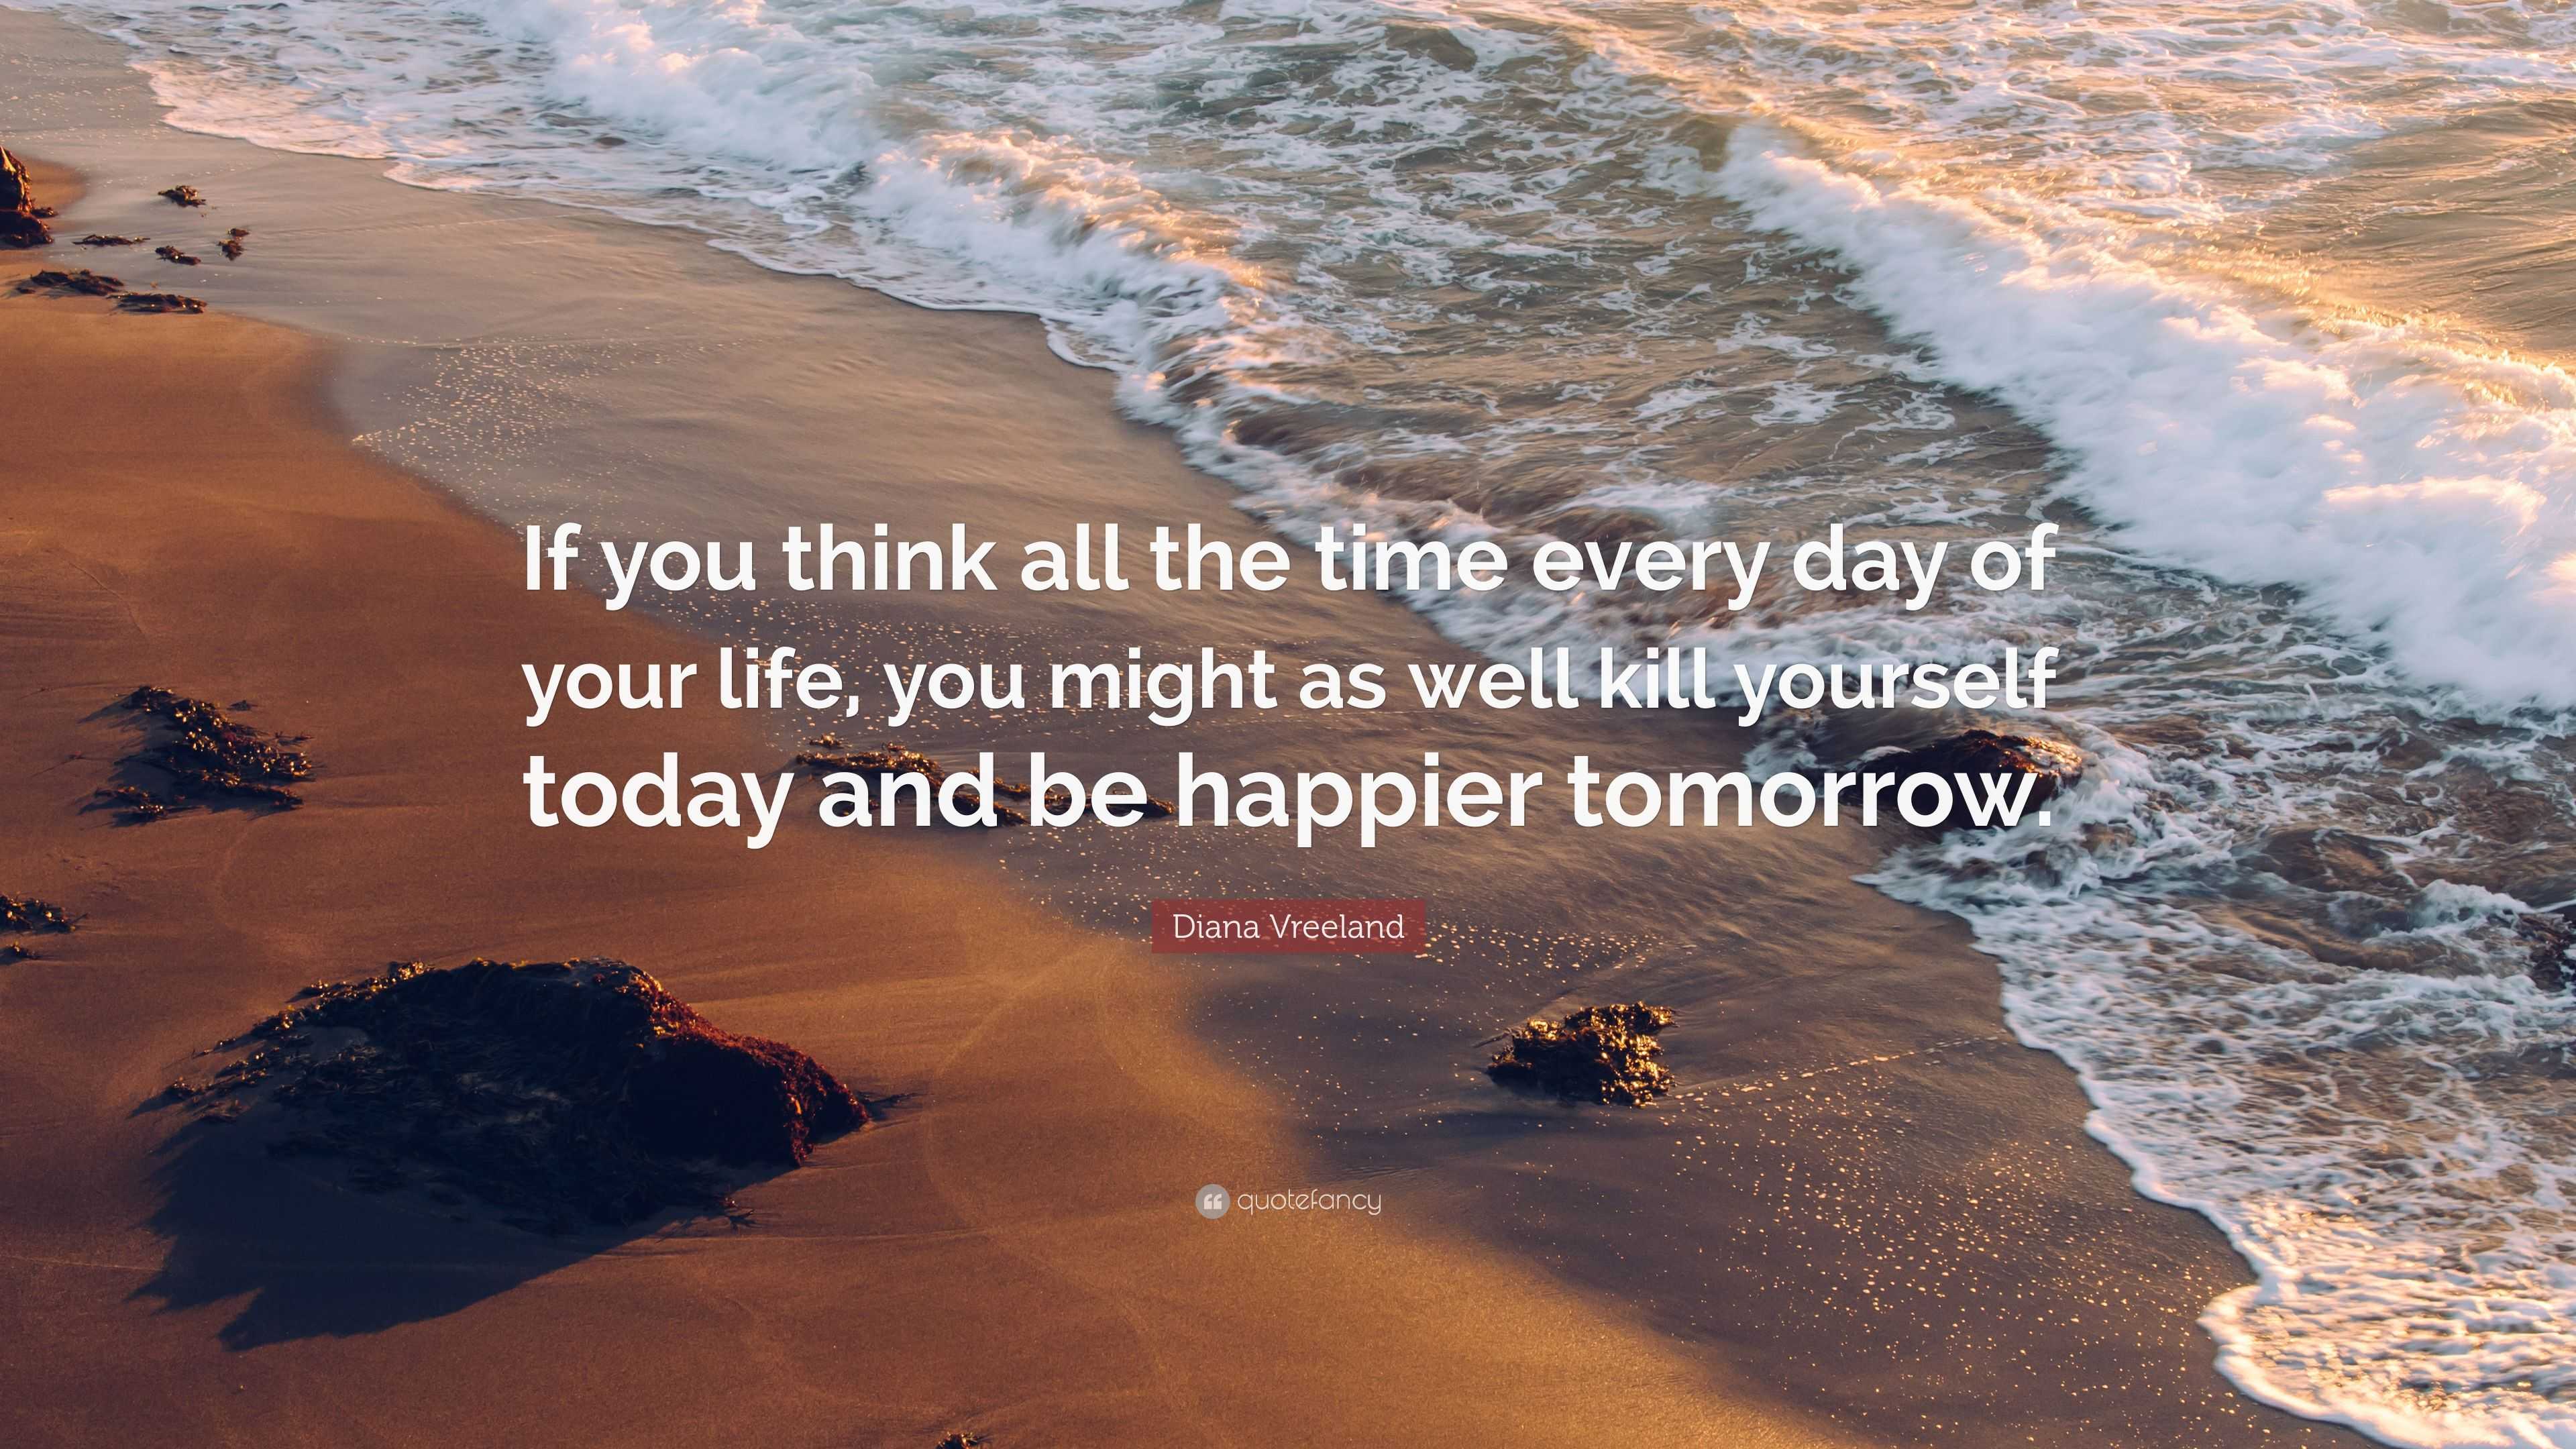 Diana Vreeland Quote: “If you think all the time every day of your